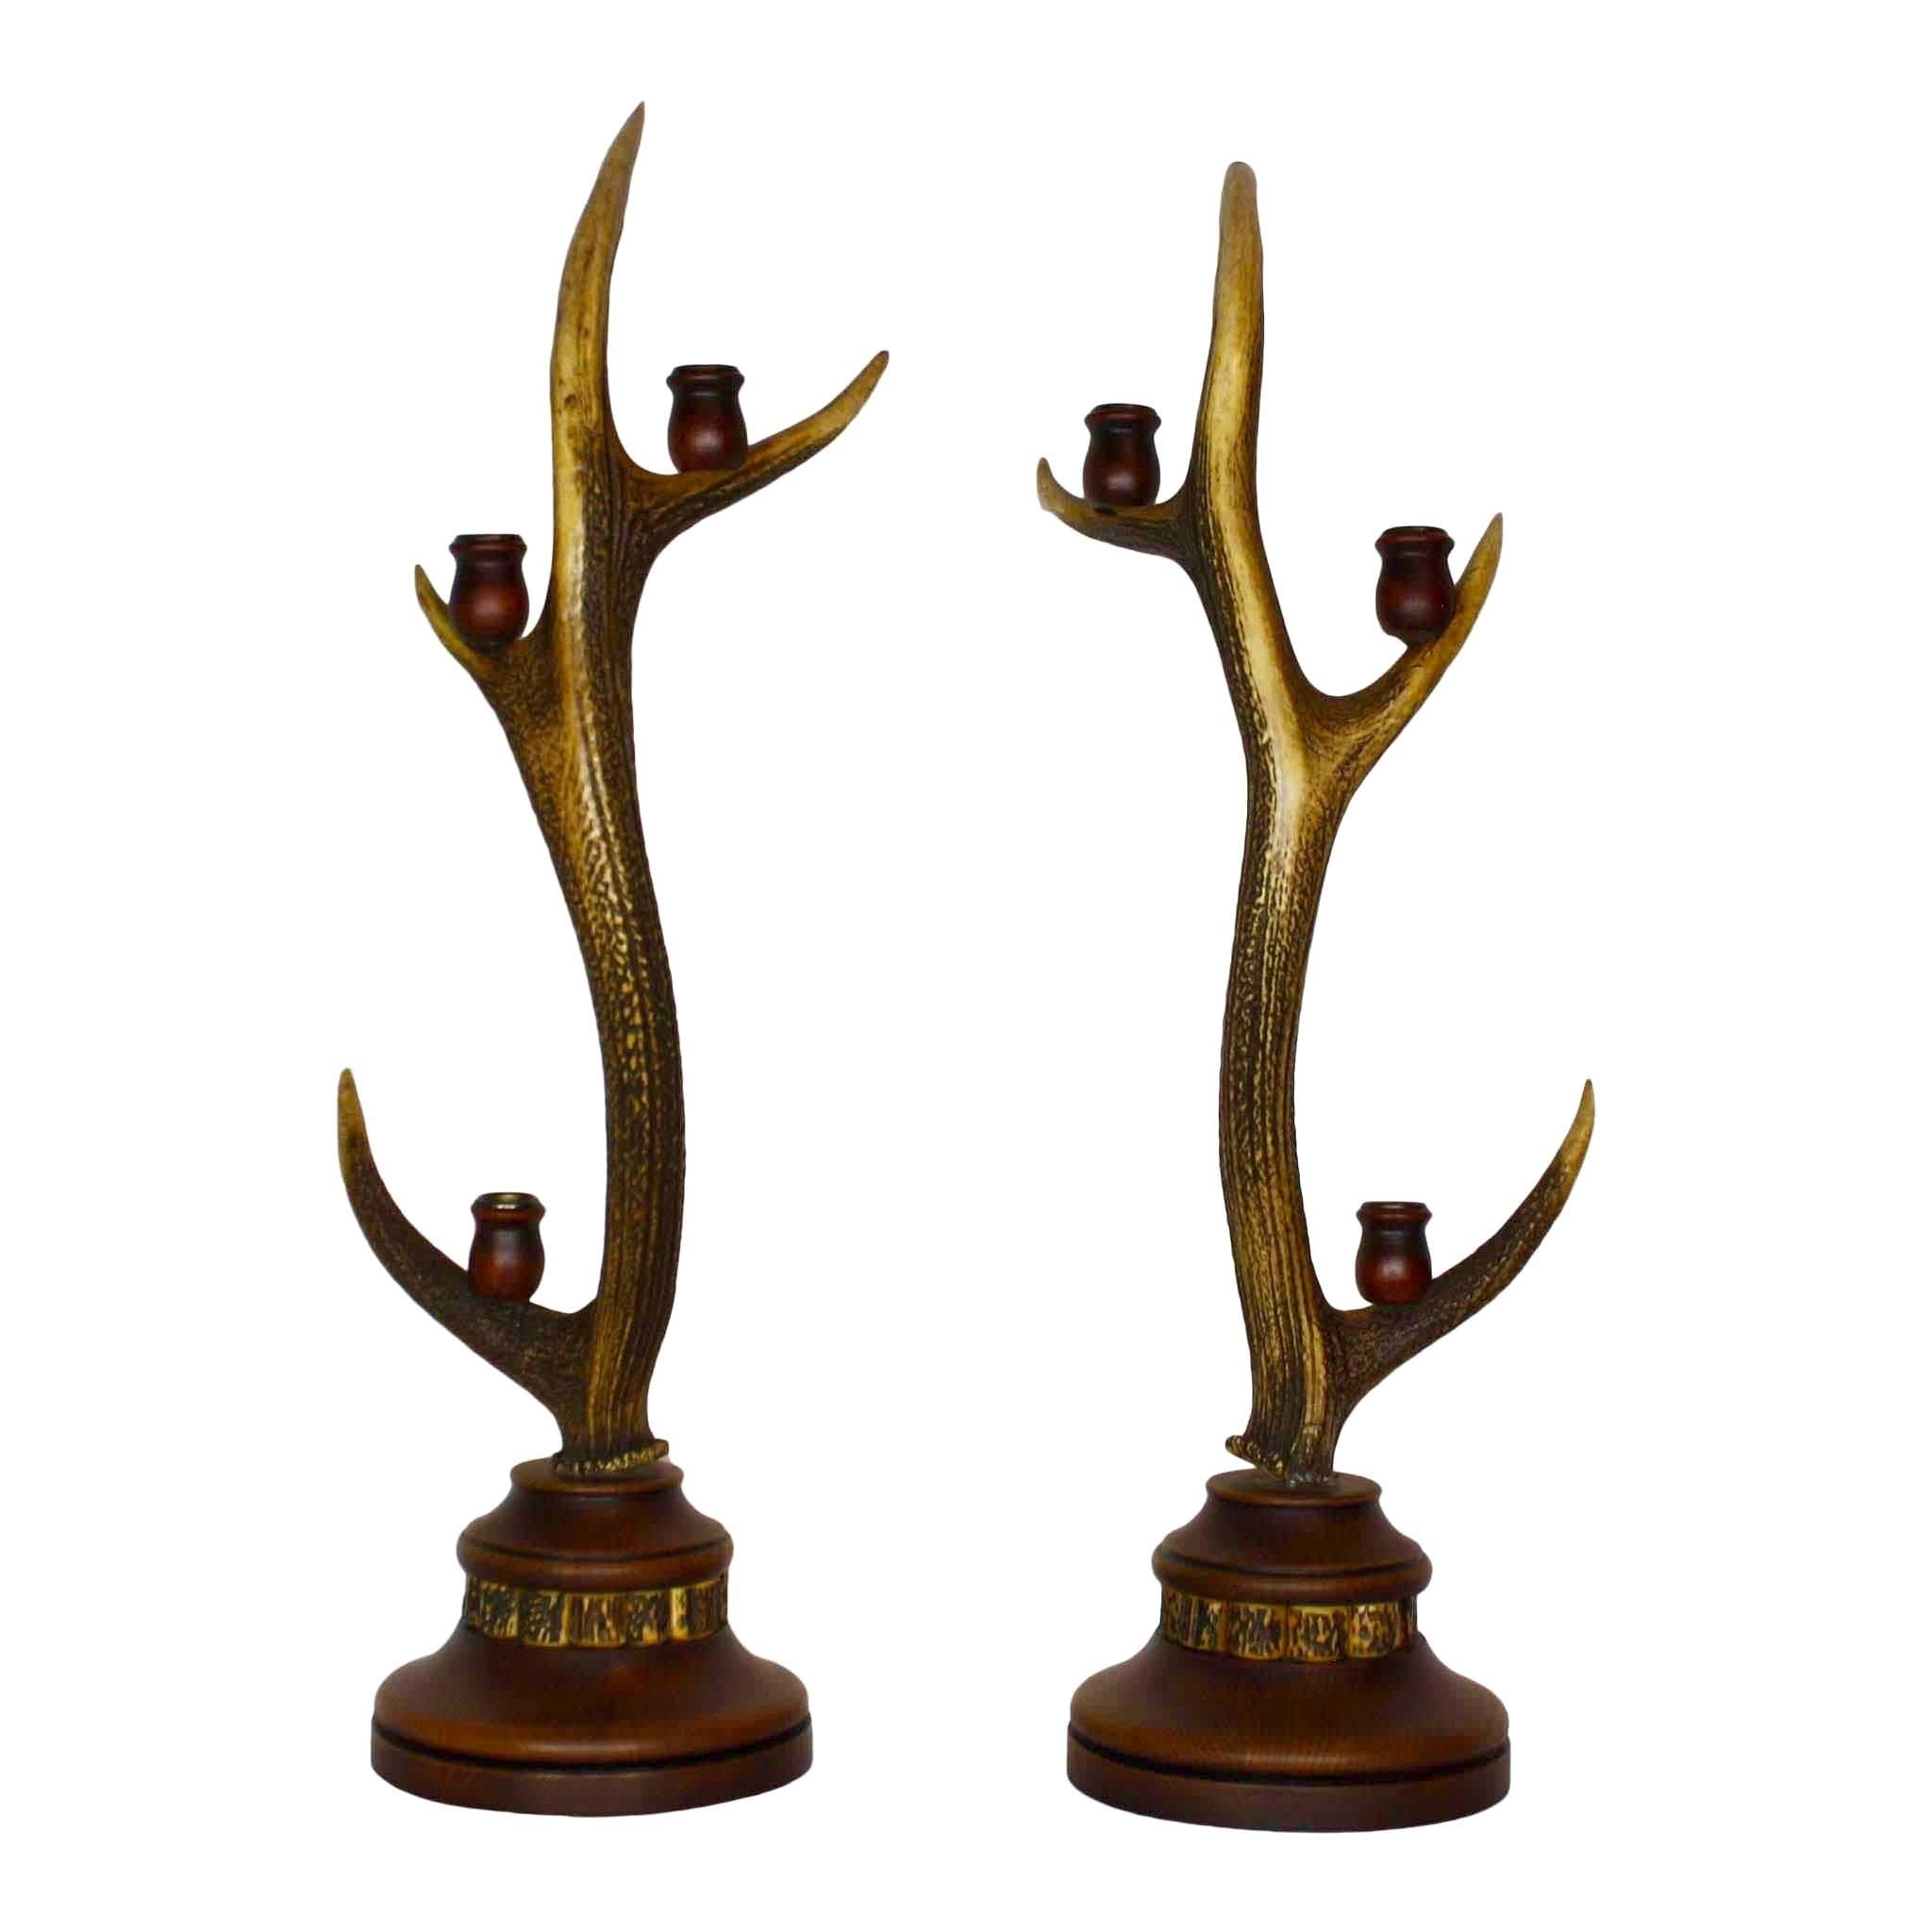 Crafted from antique European red stag antlers, this eight point candelabra set has three, wood and brass candle holders on each antler. The wood bases are accented with a ring of decorative antler pieces. One of the antlers has a broken tine.